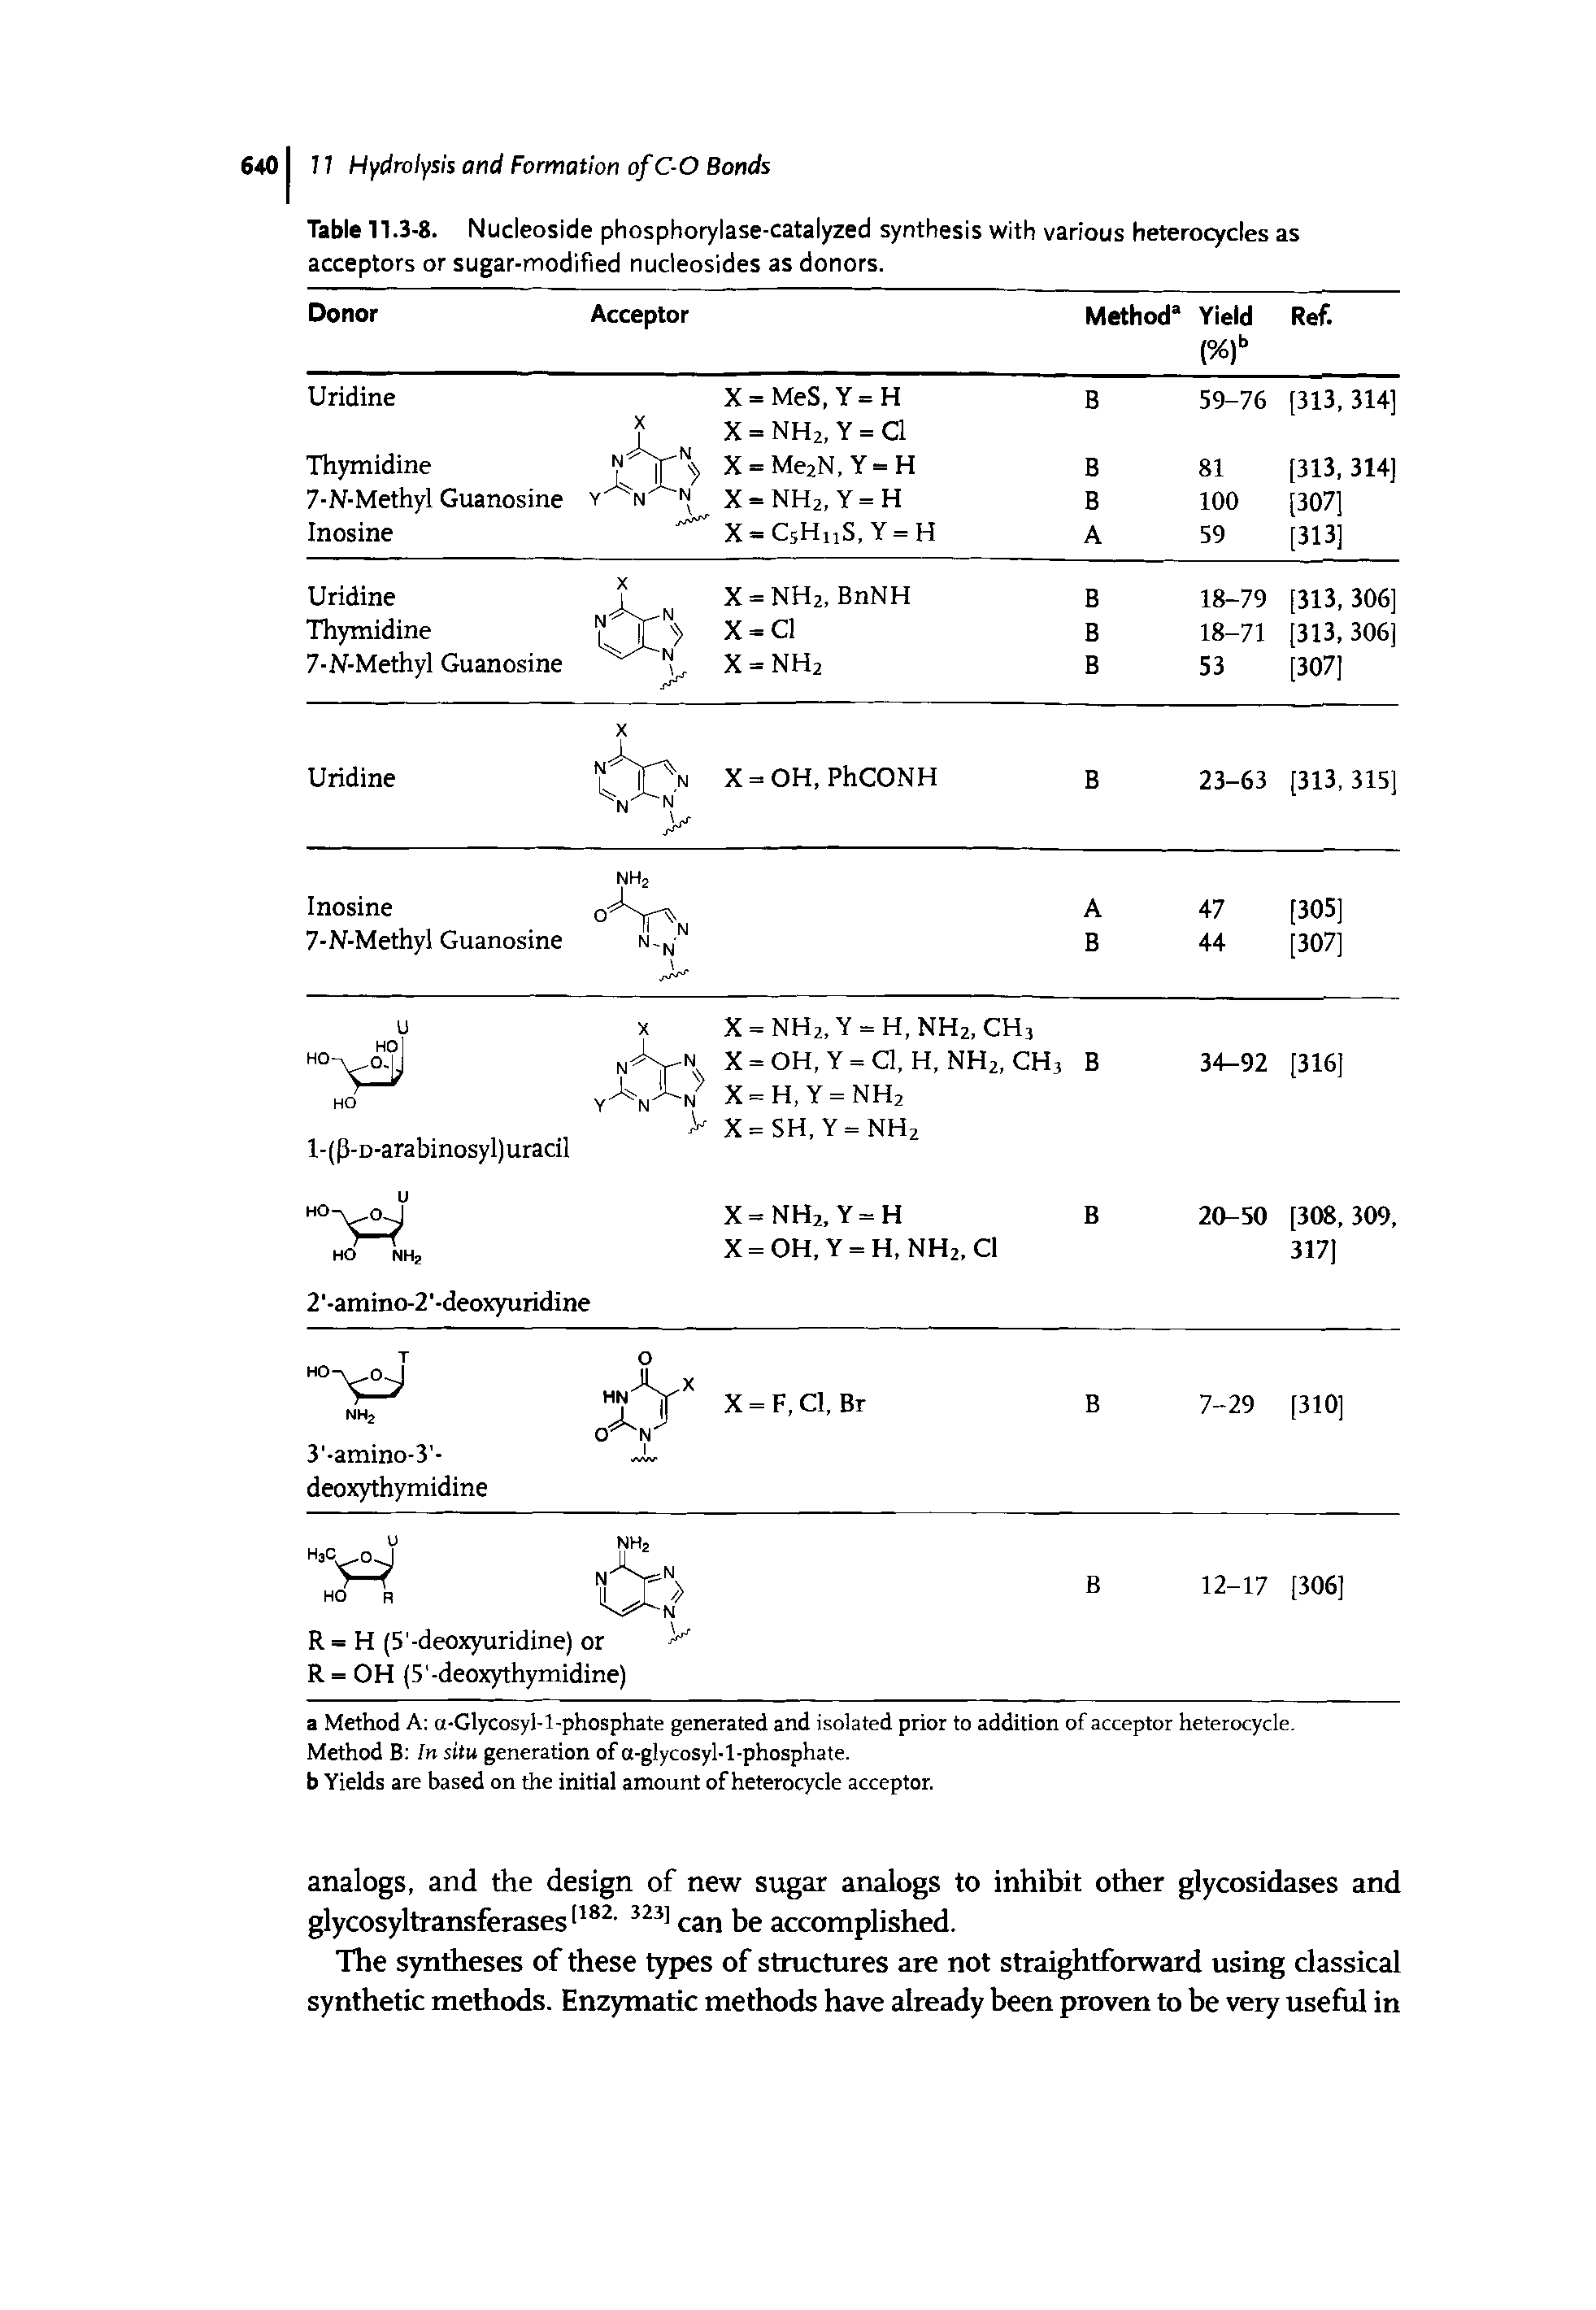 Table 11.3-8. Nucleoside phosphorylase-catalyzed synthesis with various heterocycles as acceptors or sugar-modified nucleosides as donors.